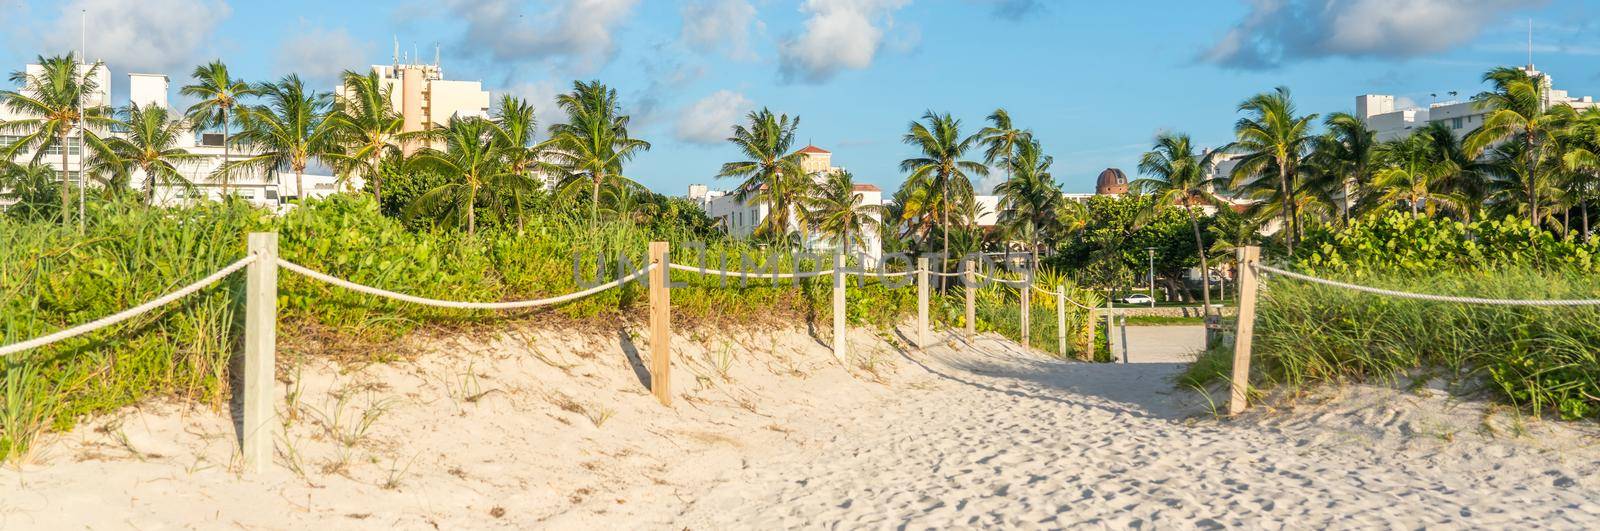 Panorama of Pathway to the beach in Miami Florida with ocean background by Mariakray